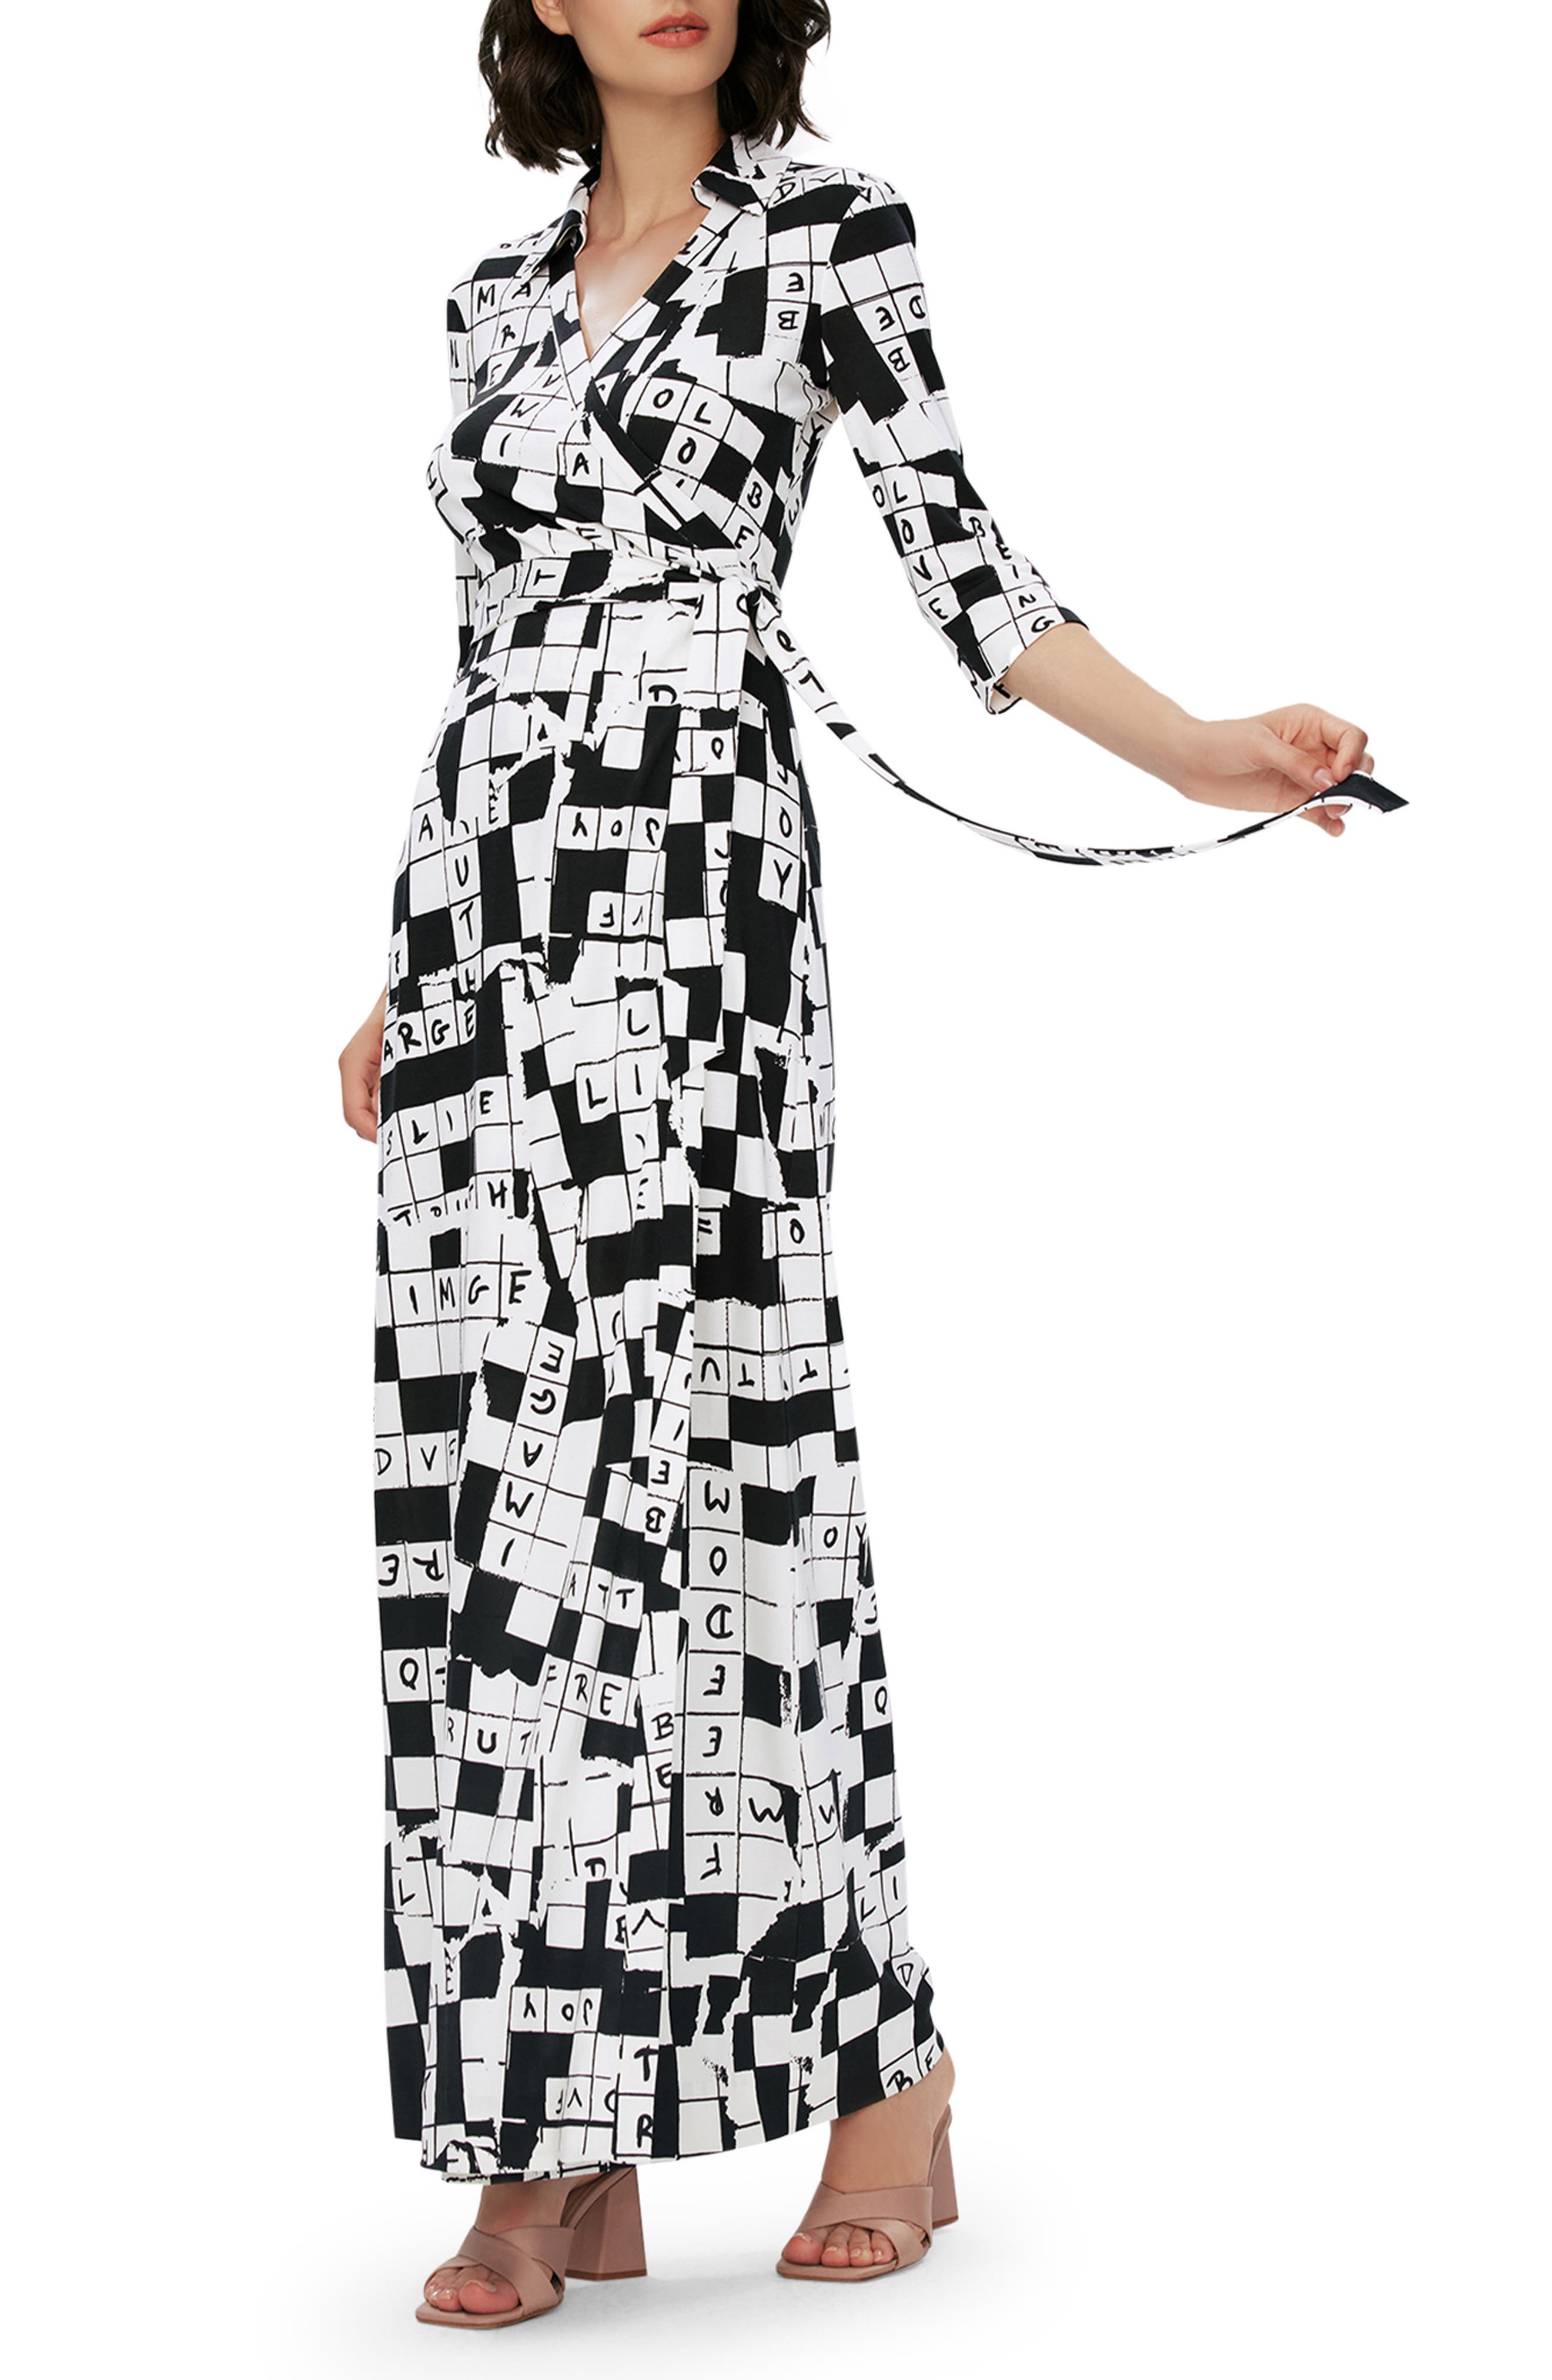 dress for a special occasion crossword